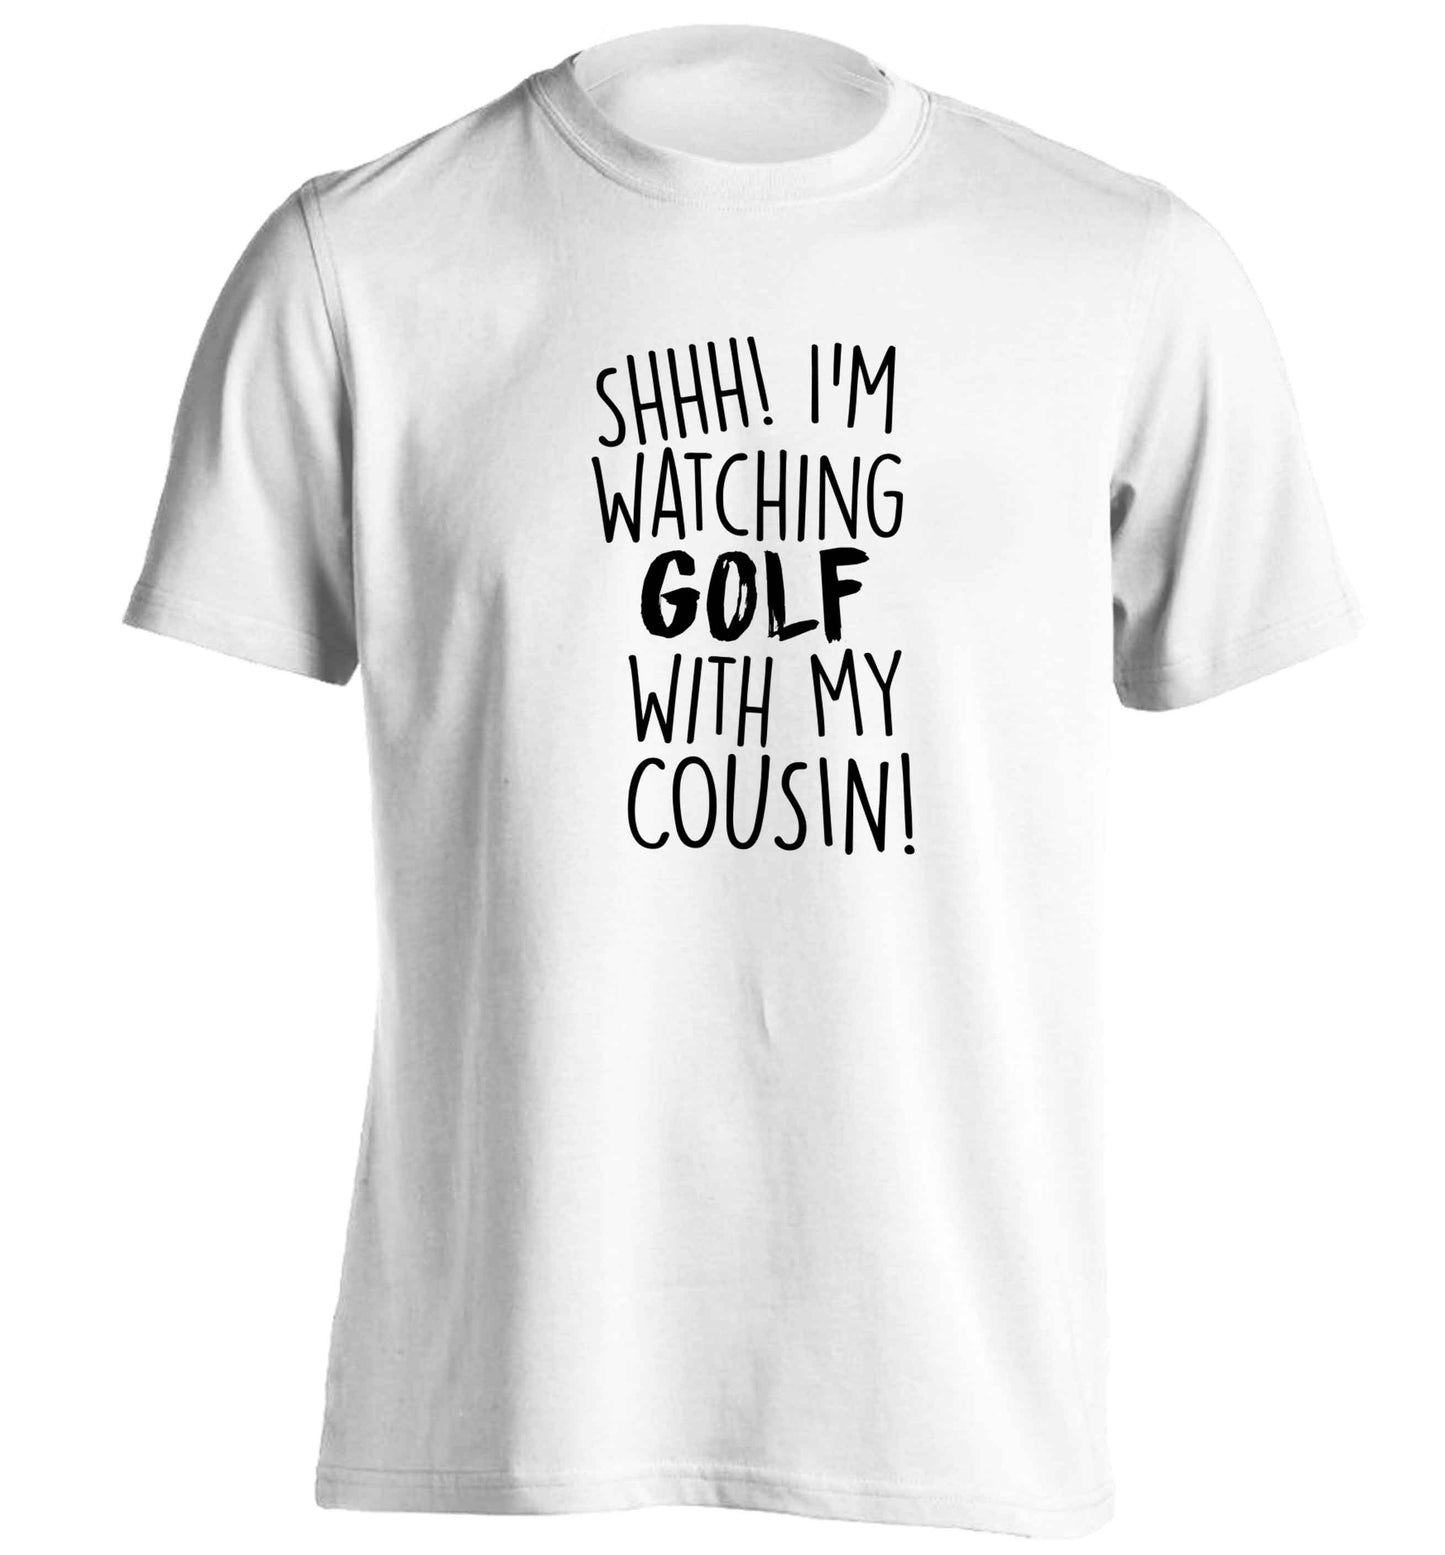 Shh I'm watching golf with my cousin adults unisex white Tshirt 2XL